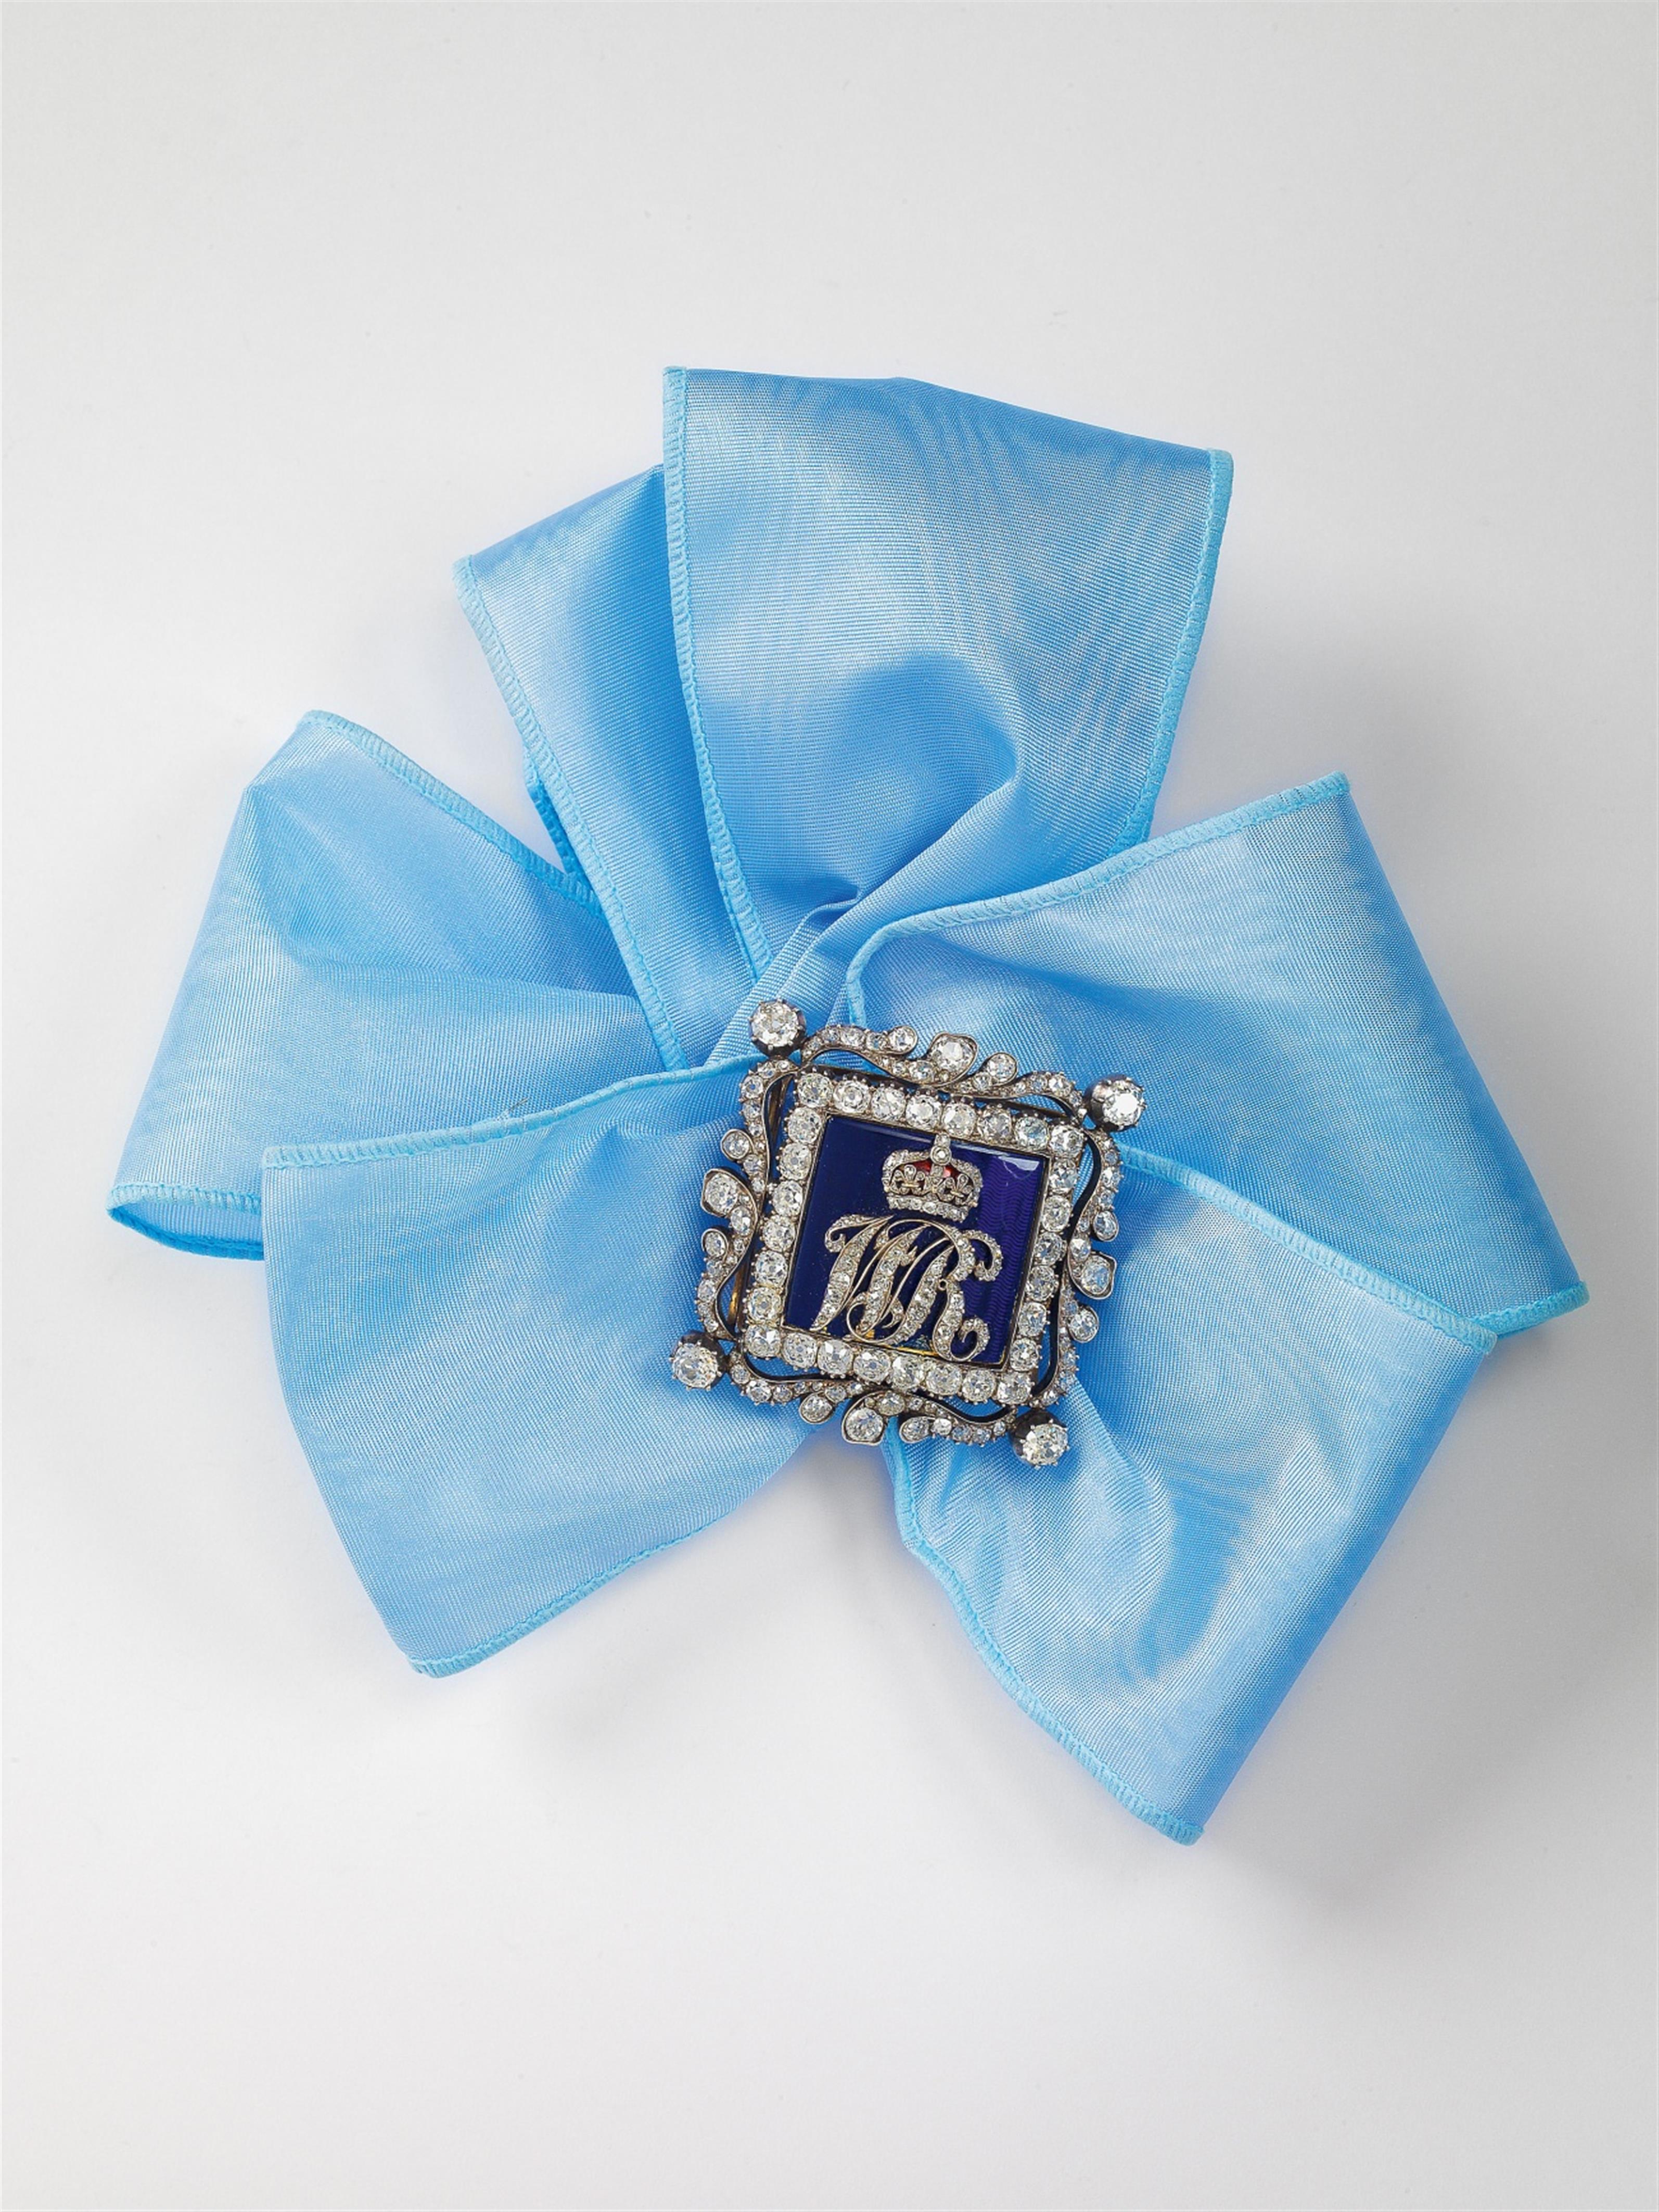 An important 14k gold, silver, enamel and diamond buckle with Royal initials of William IV - image-4